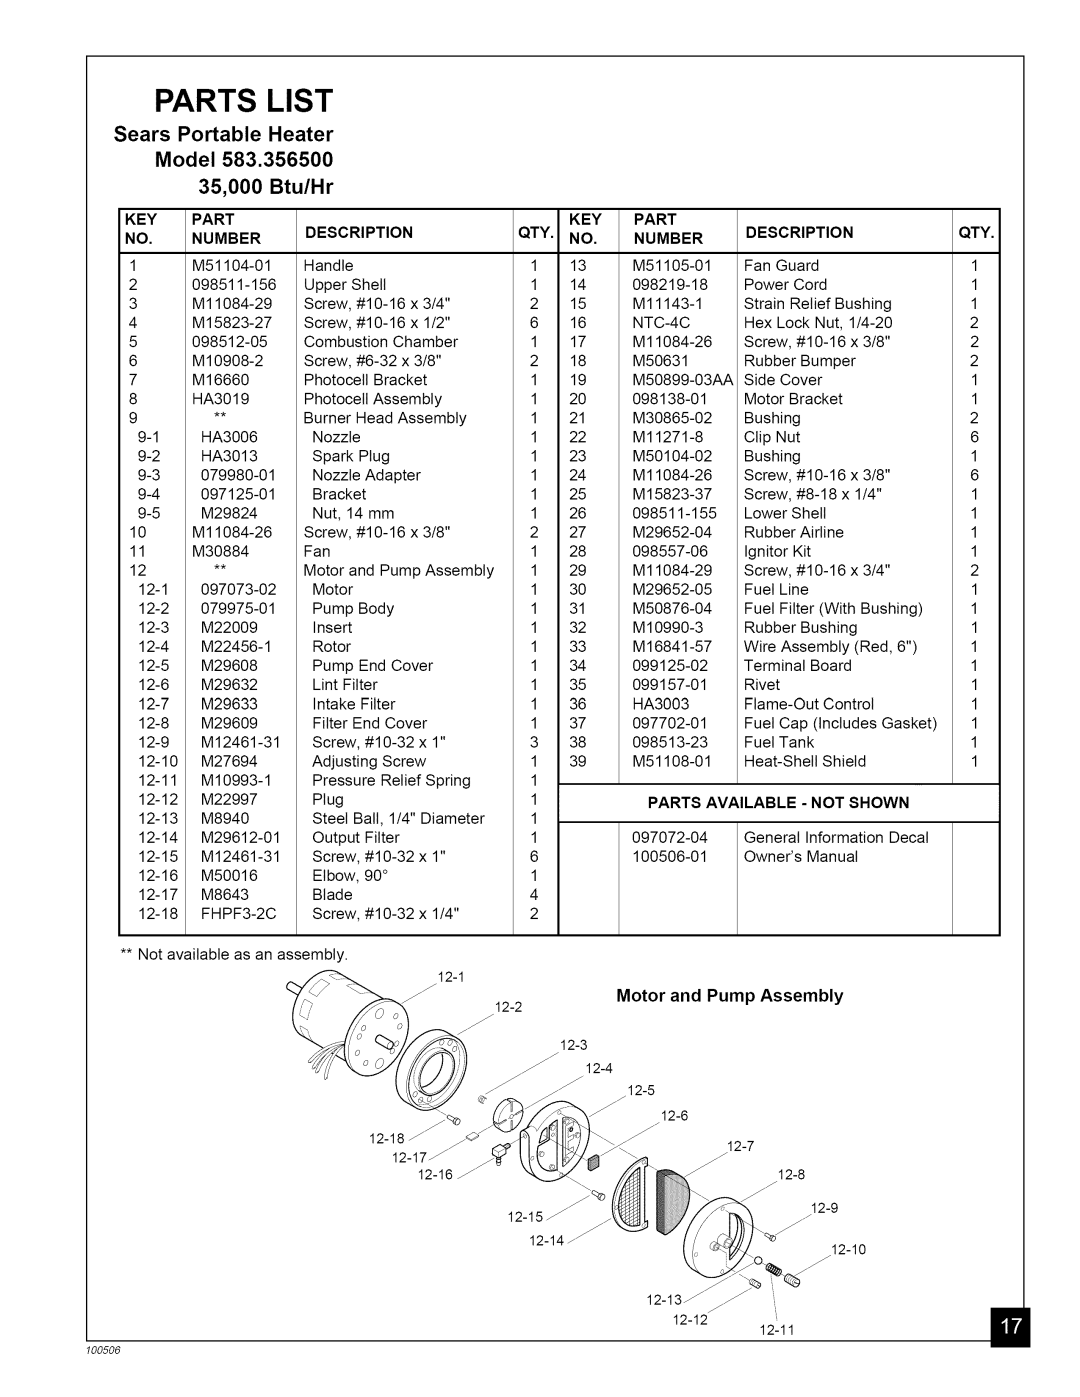 Sears 583.3565 Parts List, Motor and Pump Assembly, Sears Portable Heater Model 35,000 Btu/Hr, No. Number, Description 